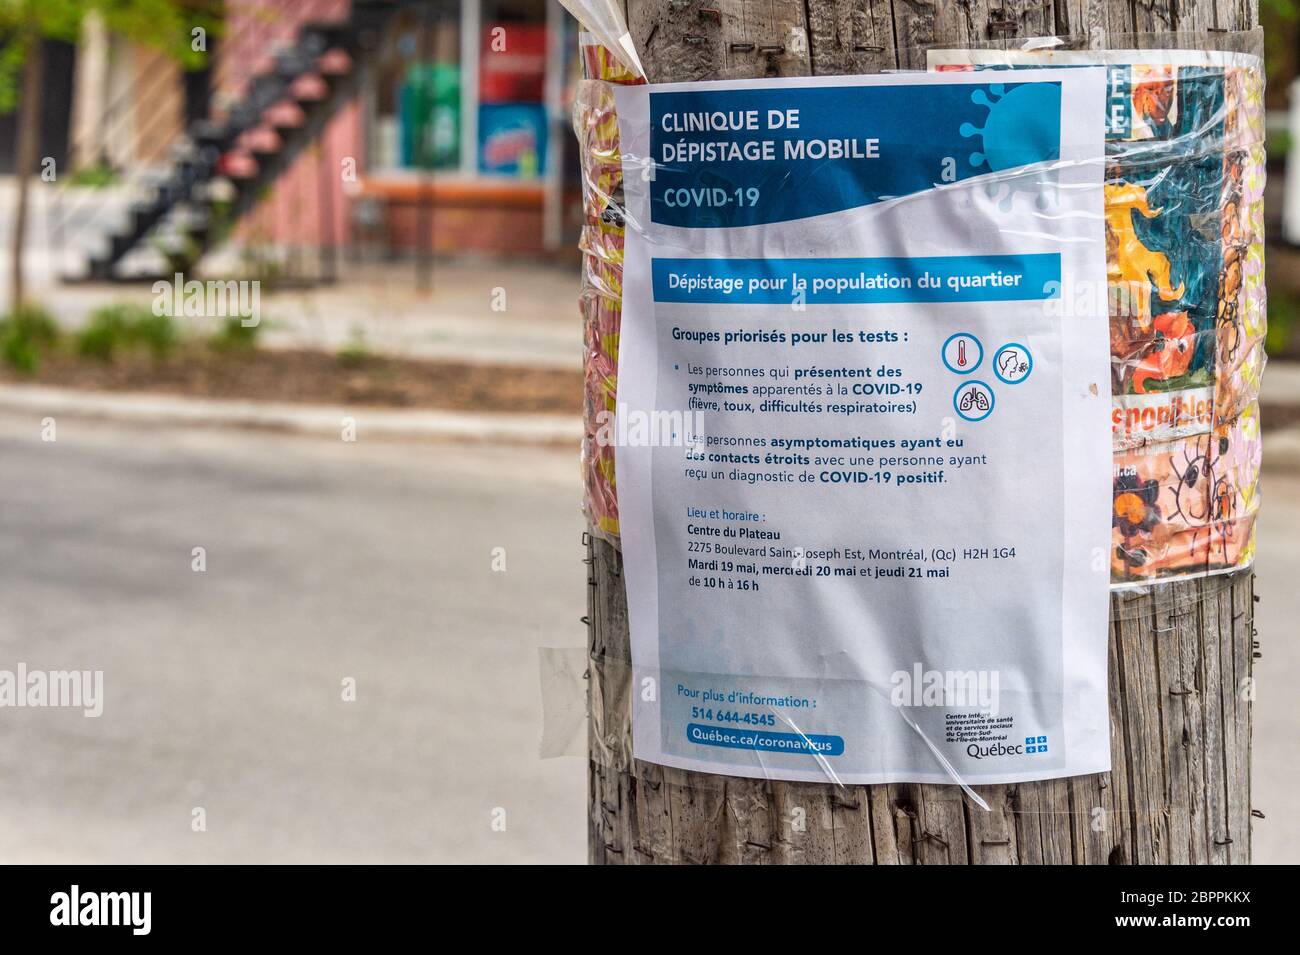 Montreal, CA - 19 May 2020: Poster for mobile COVID-19 testing clinic in Plateau district Stock Photo